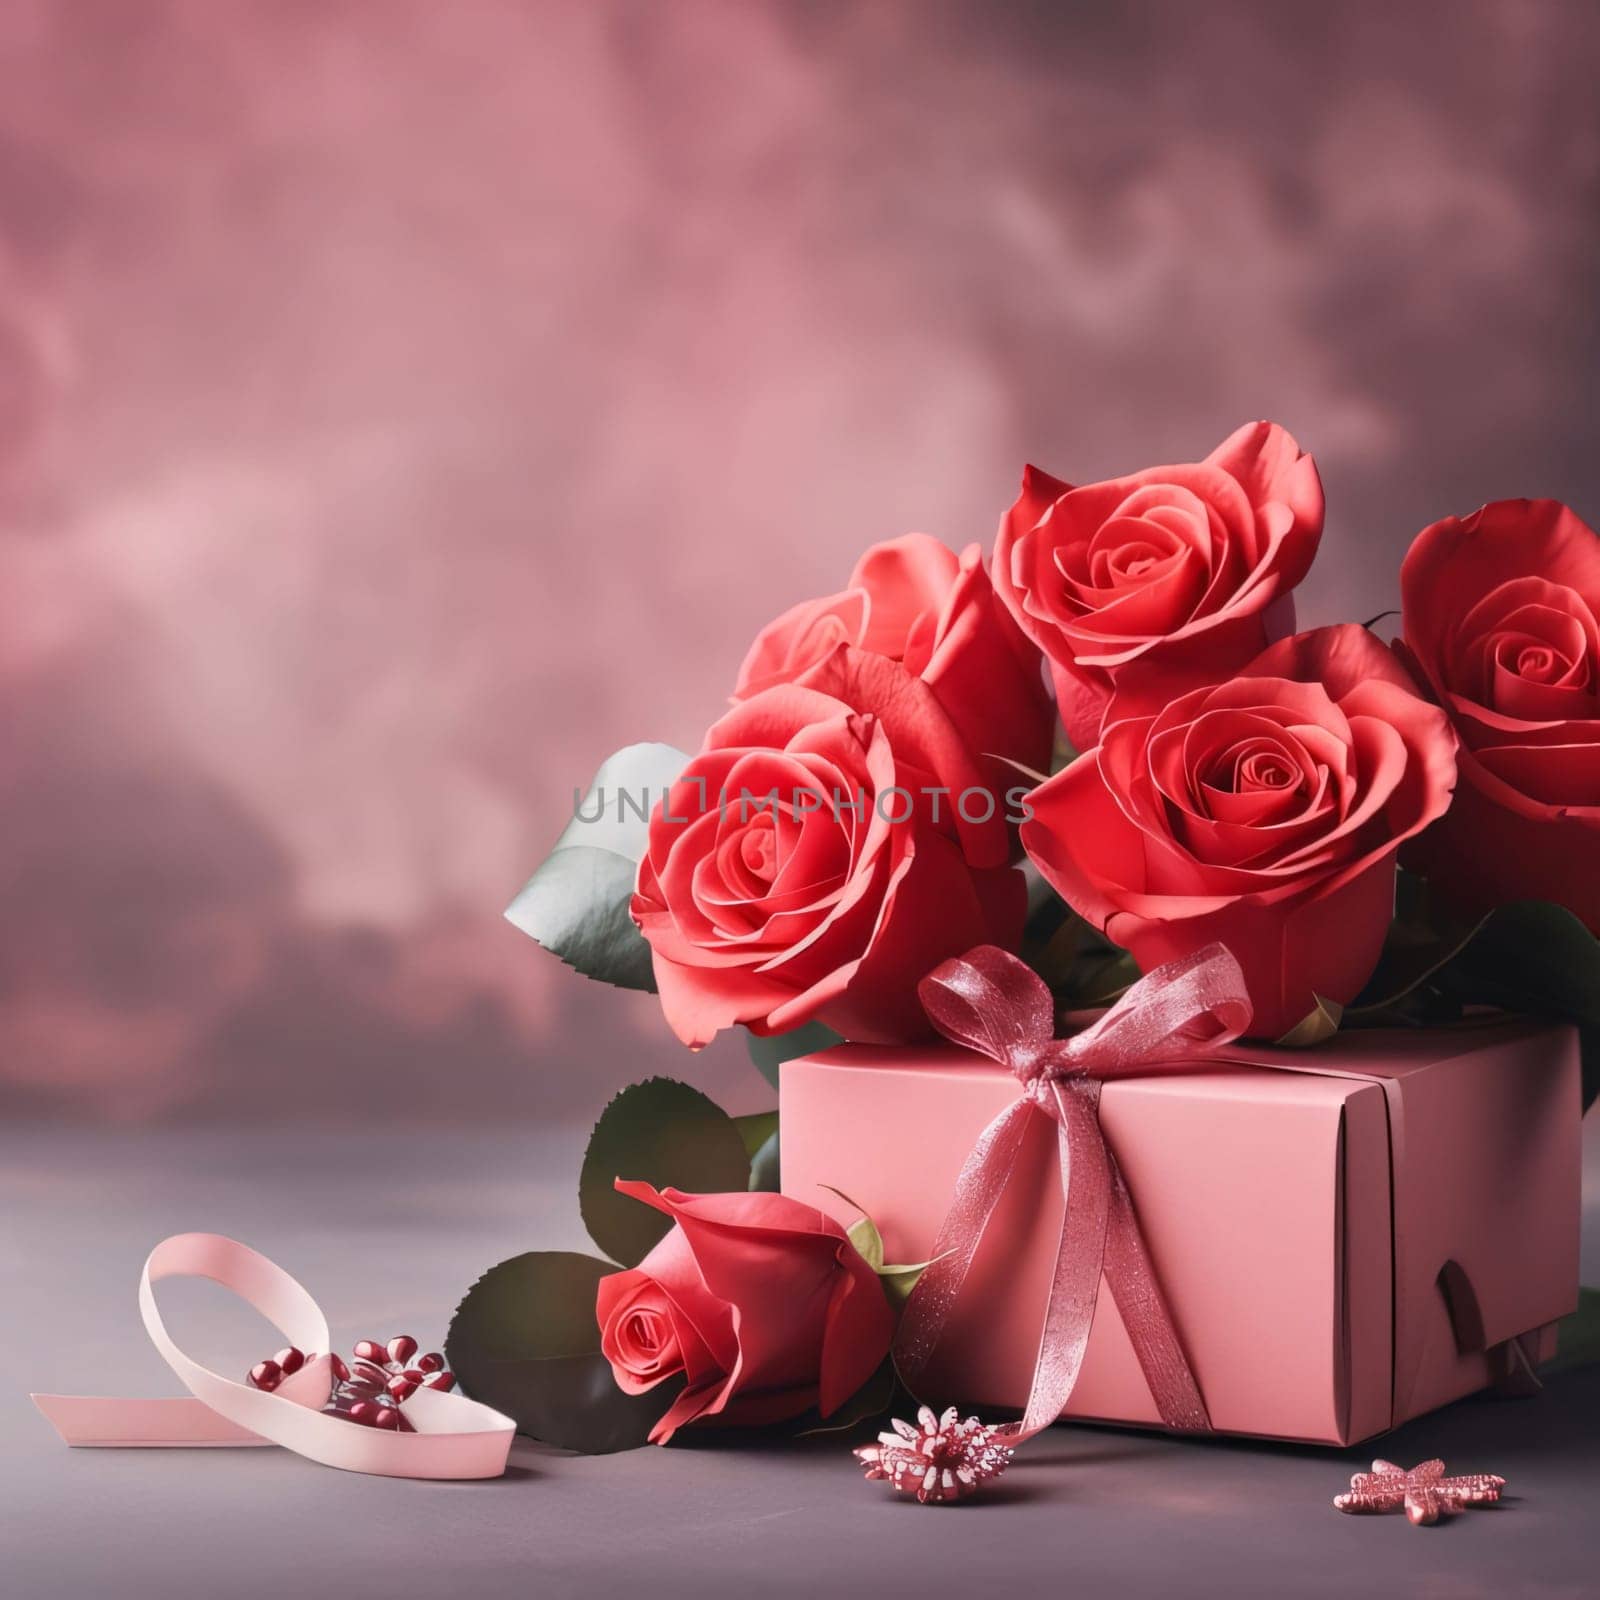 Red roses and a box, a gift with a bright bow. Heart as a symbol of affection and love. The time of falling in love and love.